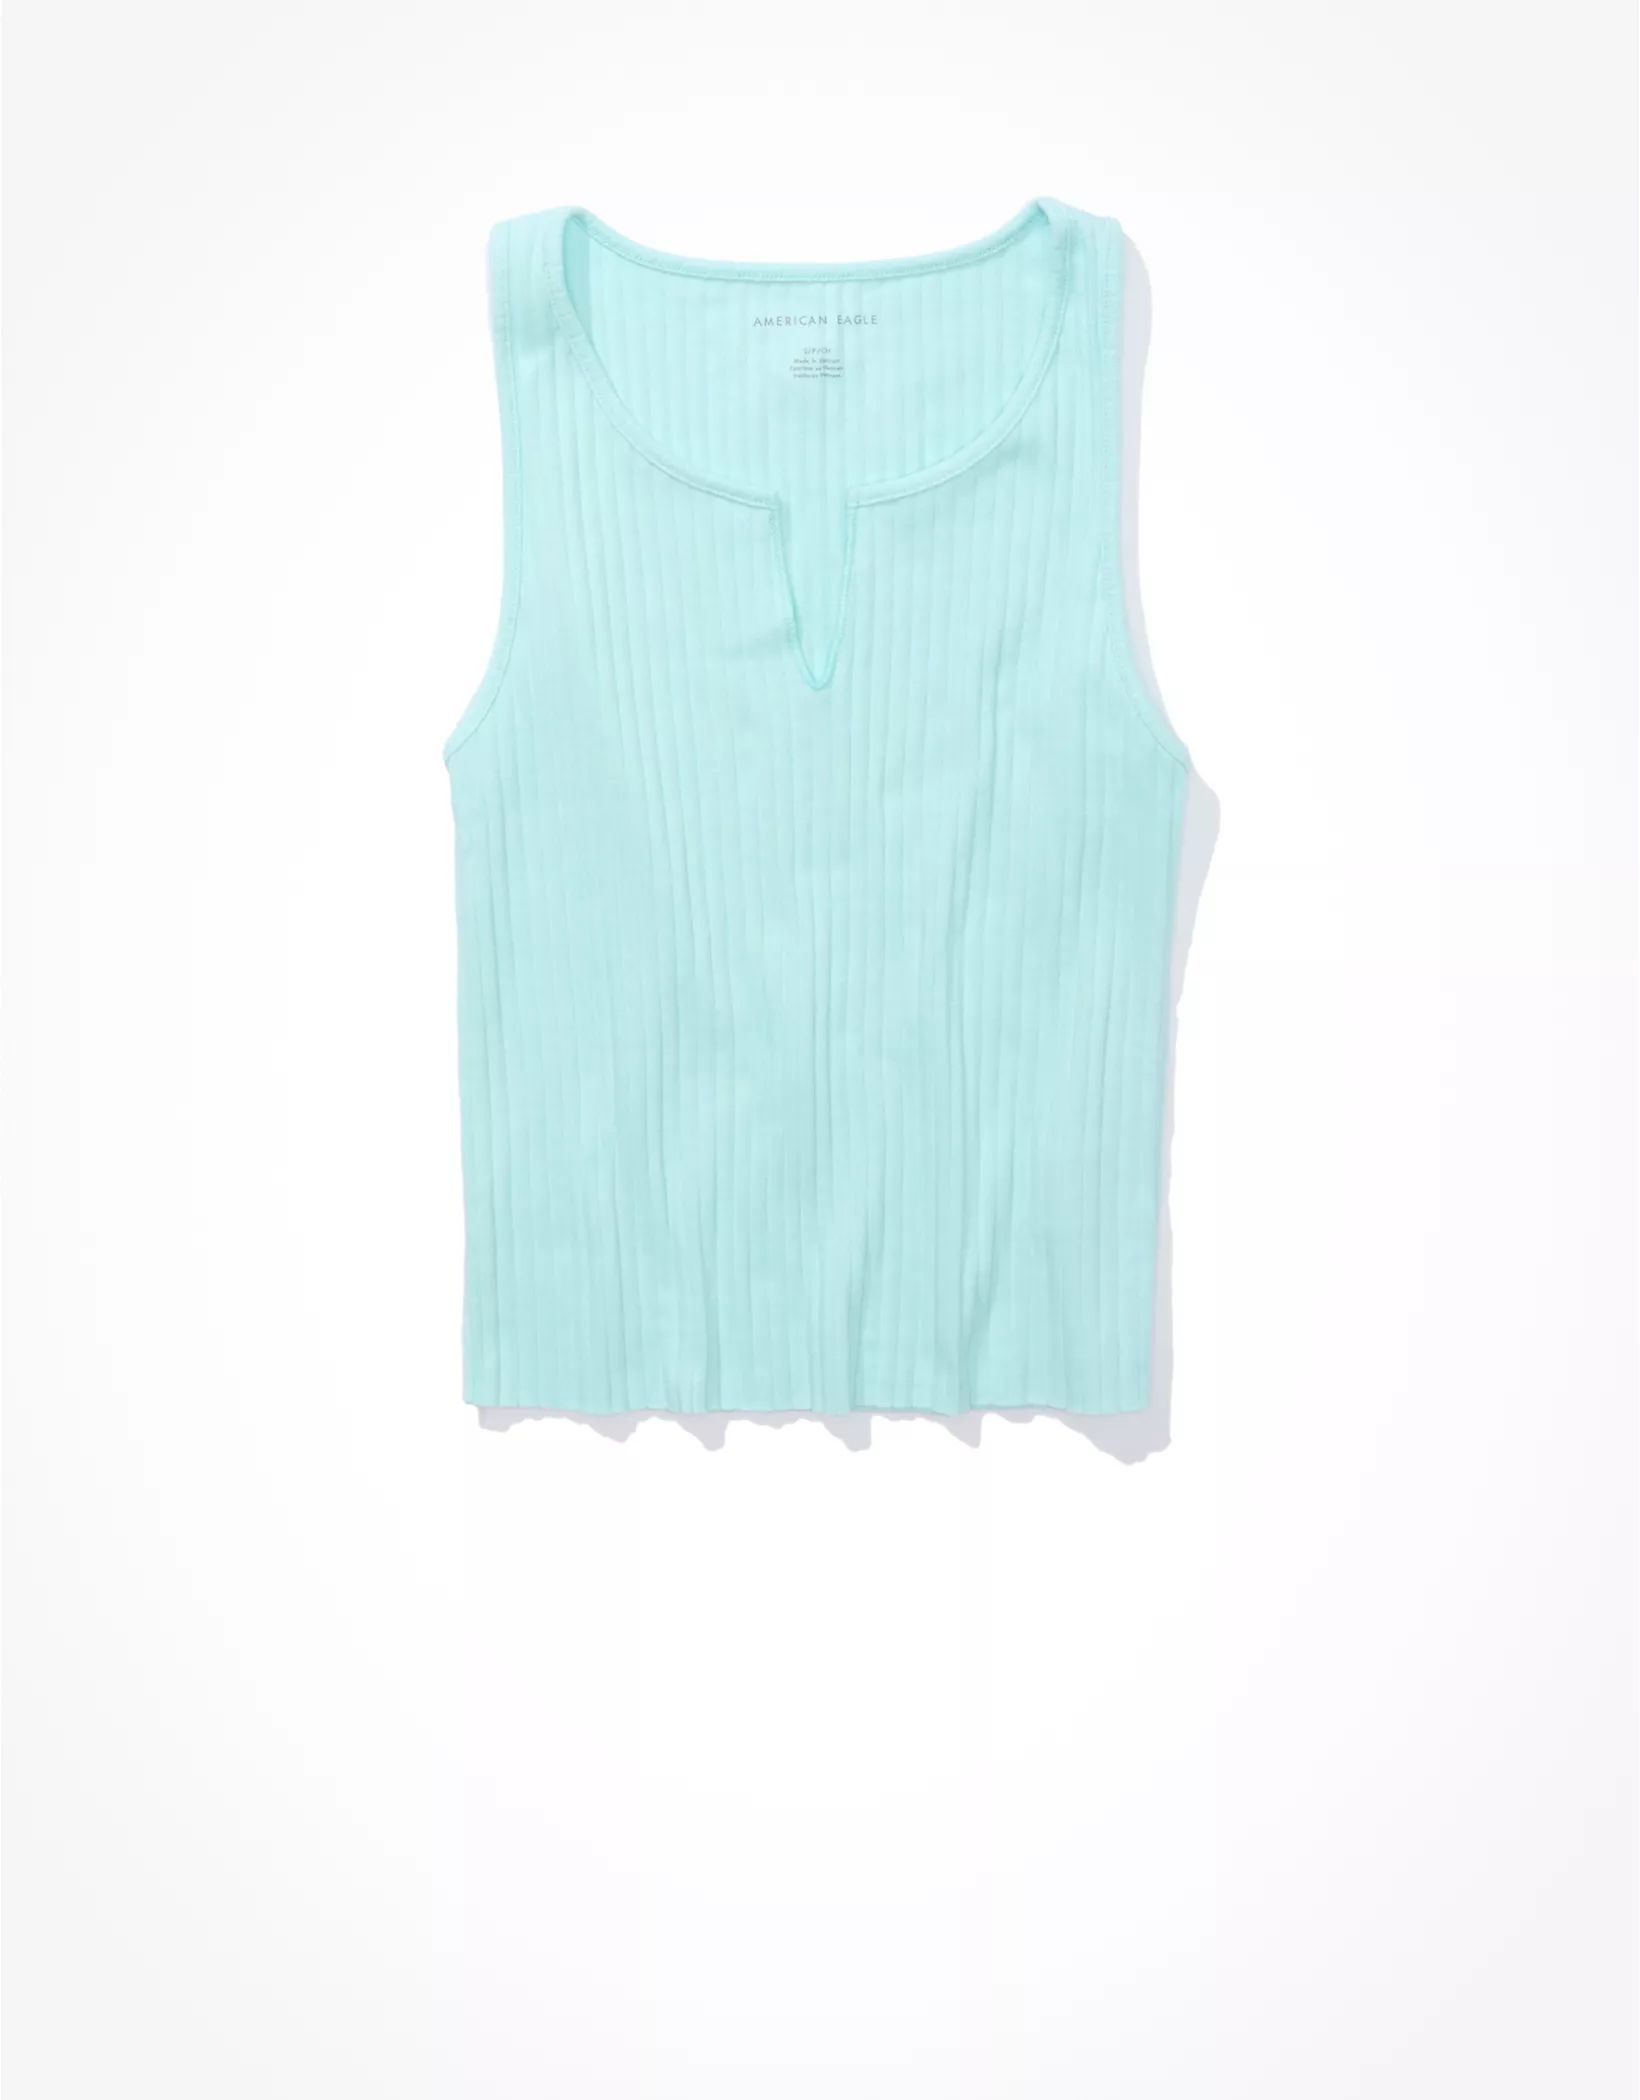 AE Notch Neck Tank Top | American Eagle Outfitters (US & CA)